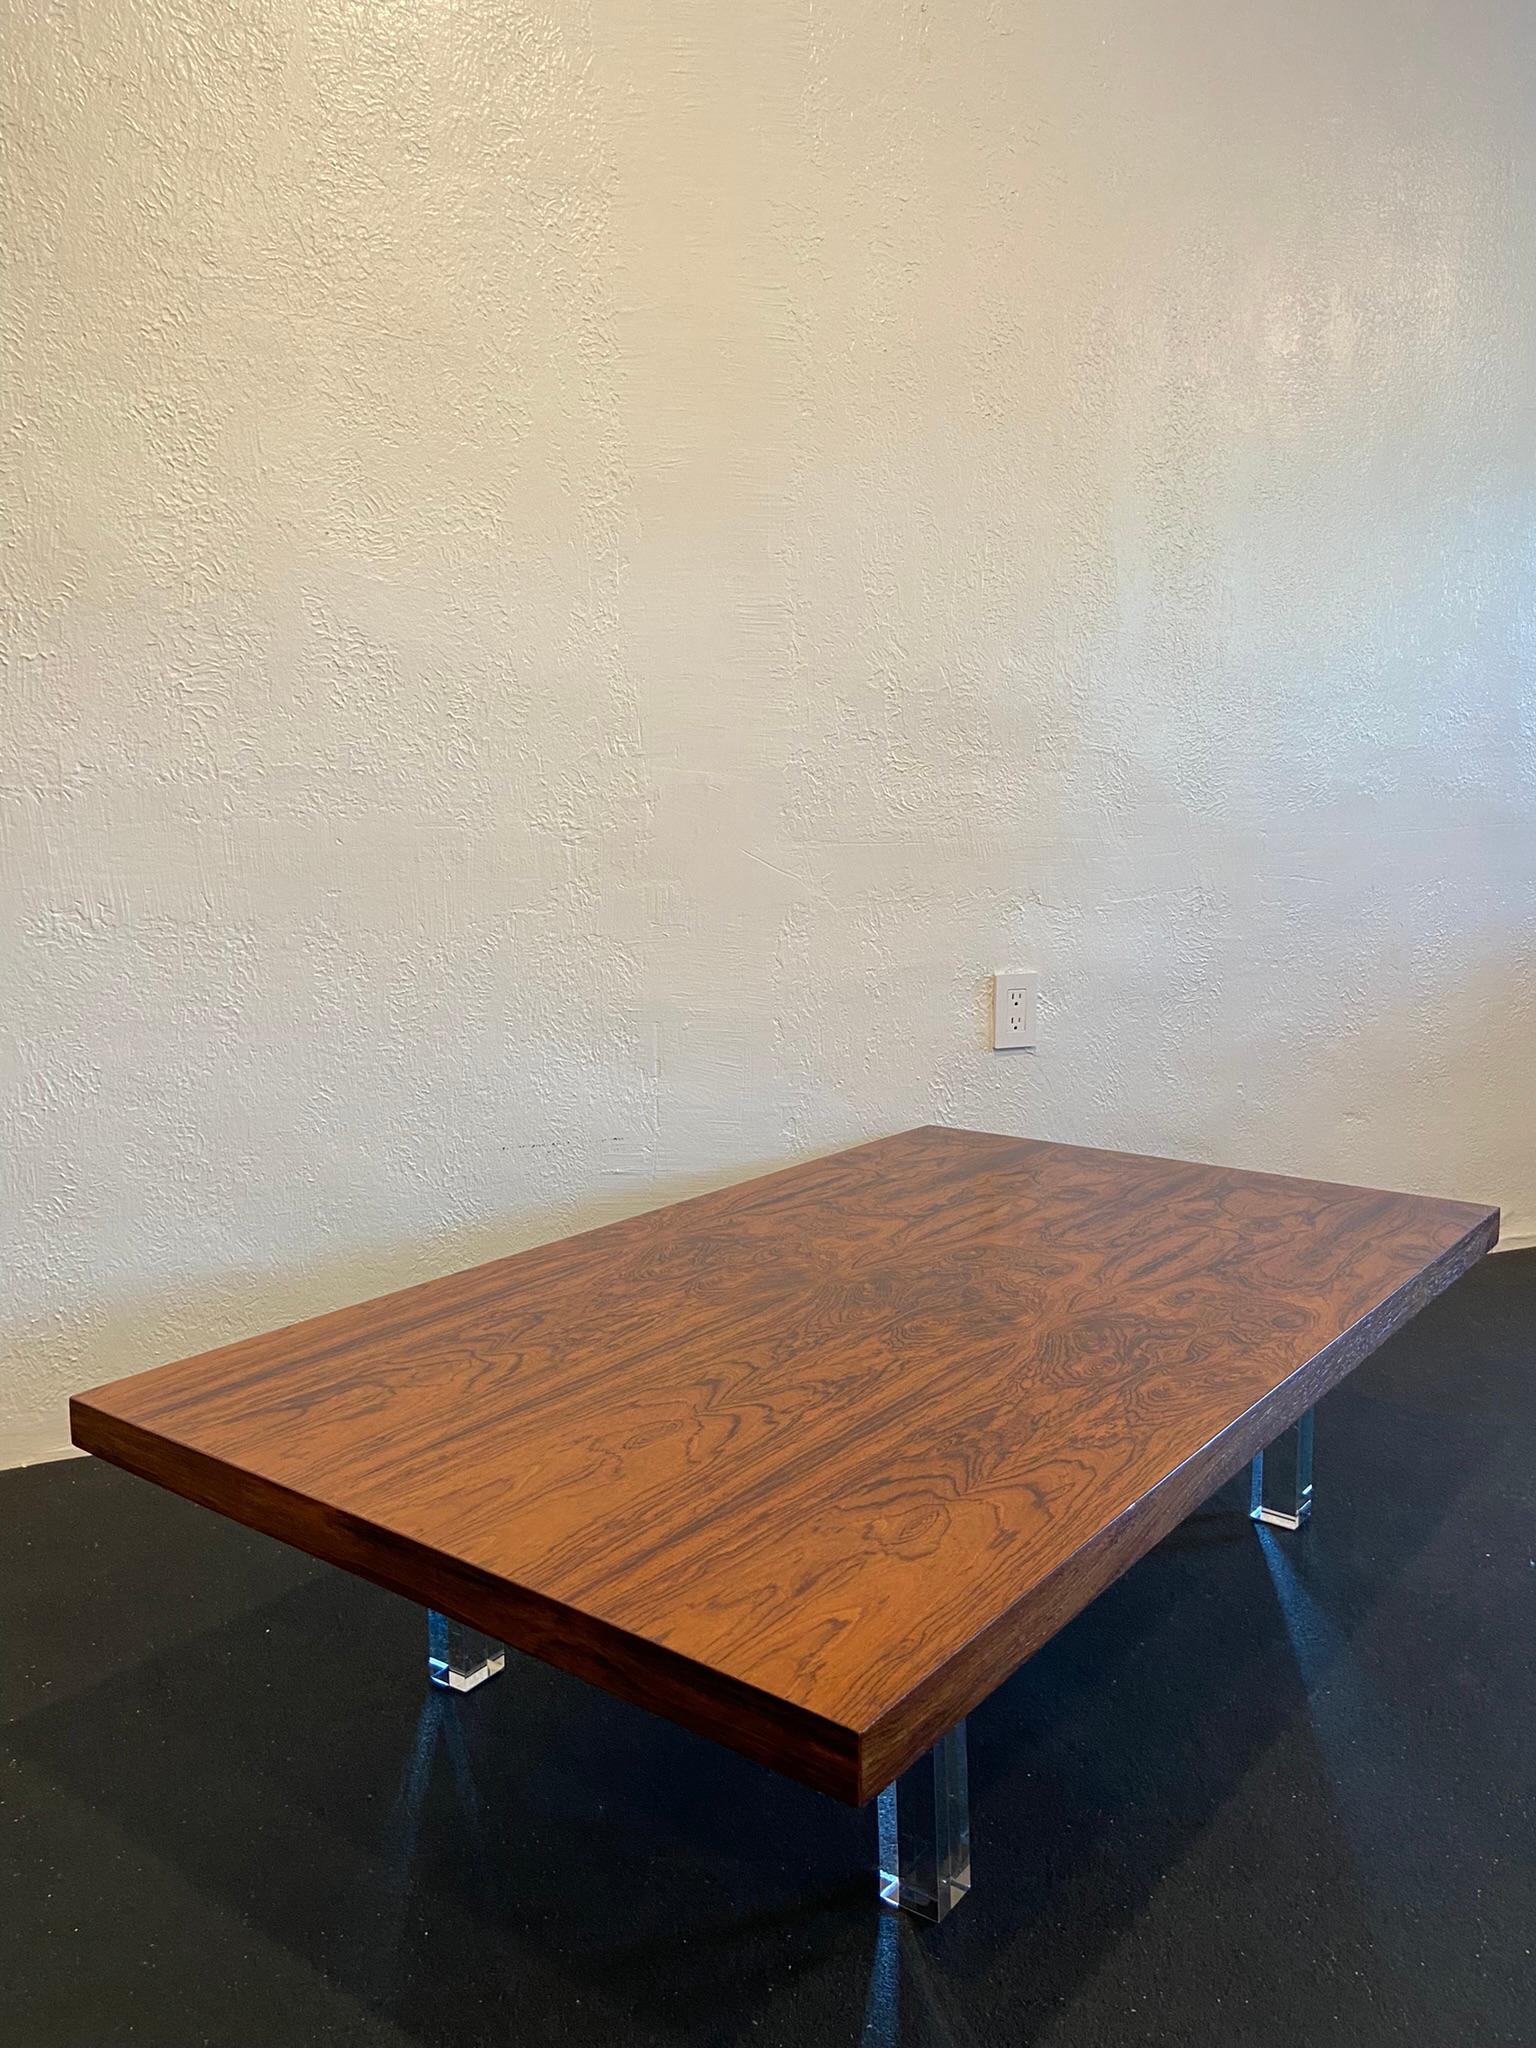 Rare Milo Baughman For Thayer Coggin rosewood coffee table on lucite legs. Likely a custom order, one off, order details found on label. Table has been refinished (please refer to photos). 

Would work well in a variety of interiors such as